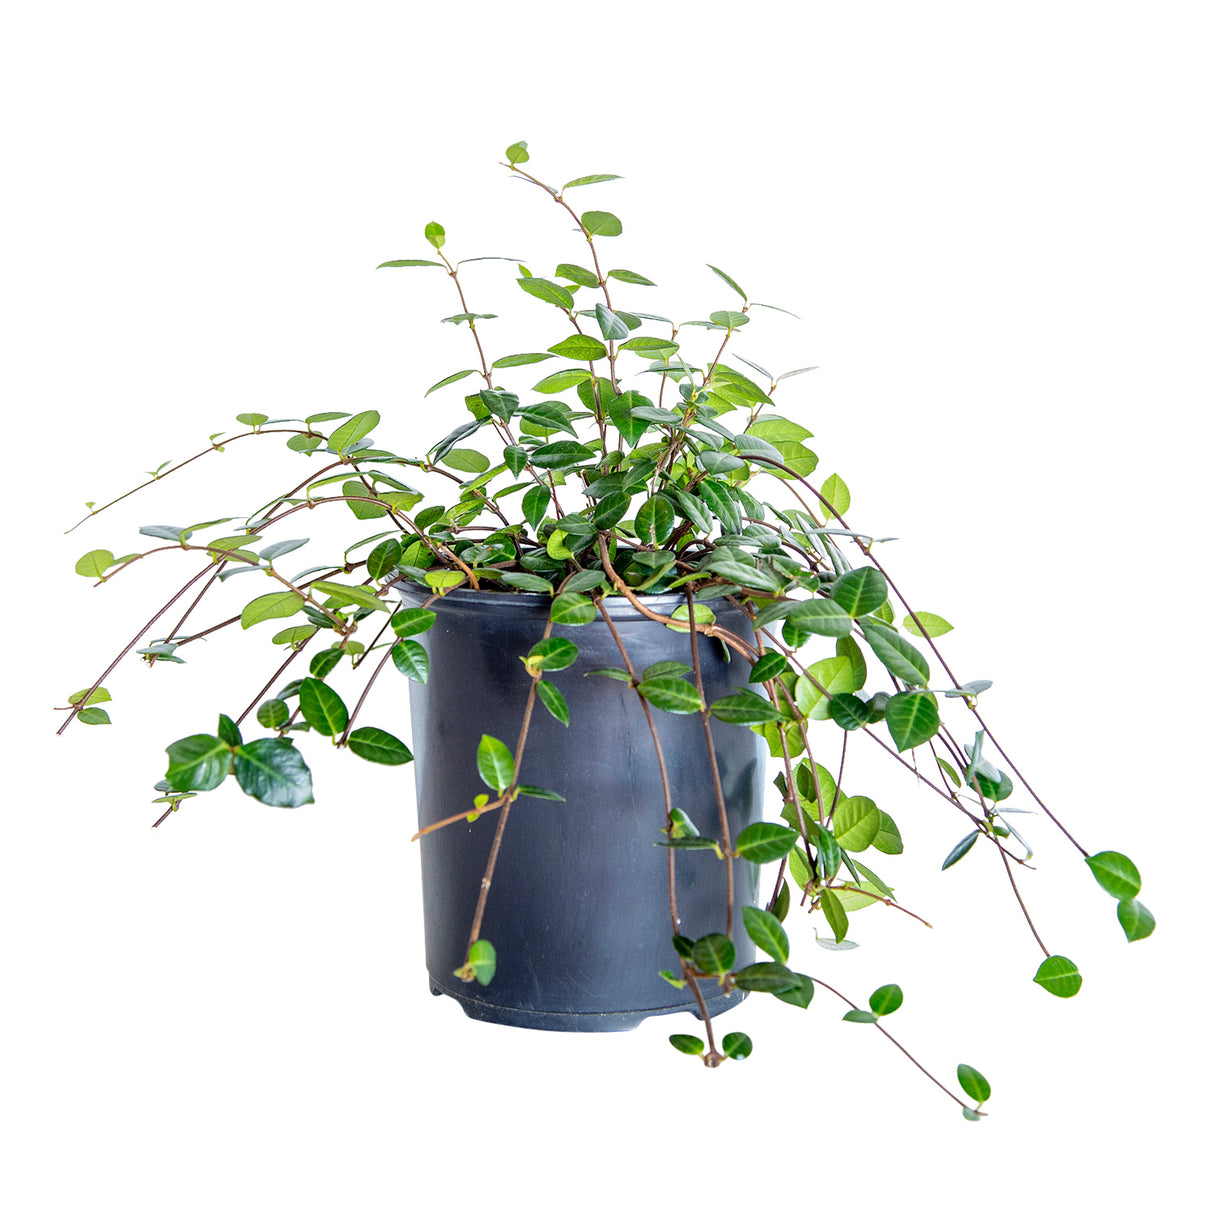 Asiatic Jasmine for sale with vining habit and glossy green leaves in a black nursery pot on a white background